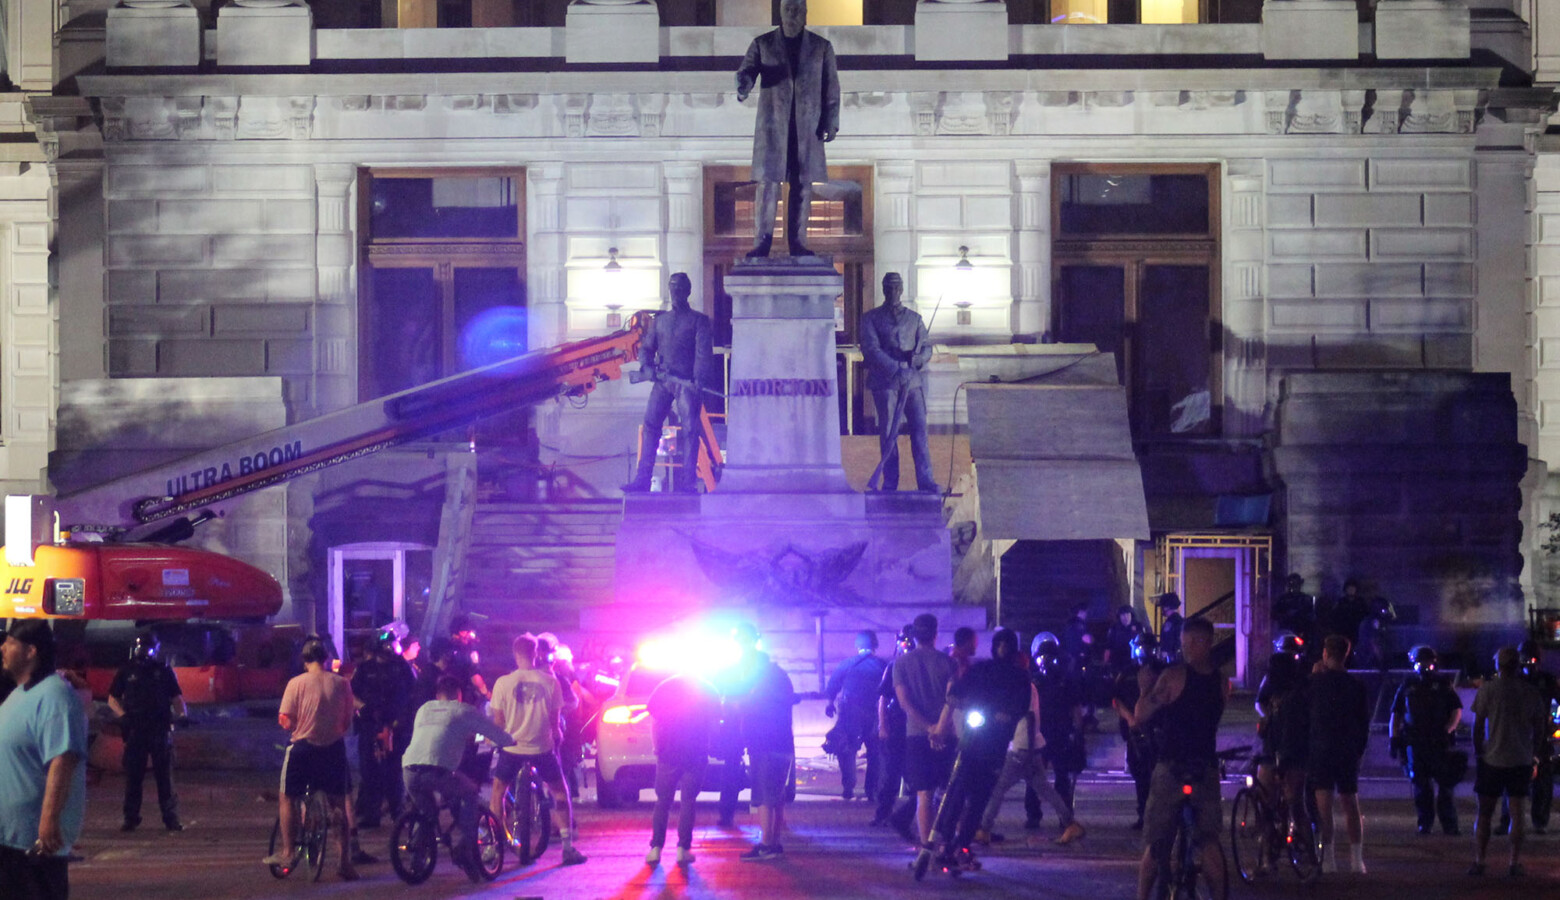 Legislation requiring local governments to prioritize protection of monuments, statues and commemorative property is likely a reaction to 2020's Black Lives Matter protests. (Lauren Chapman/IPB News)